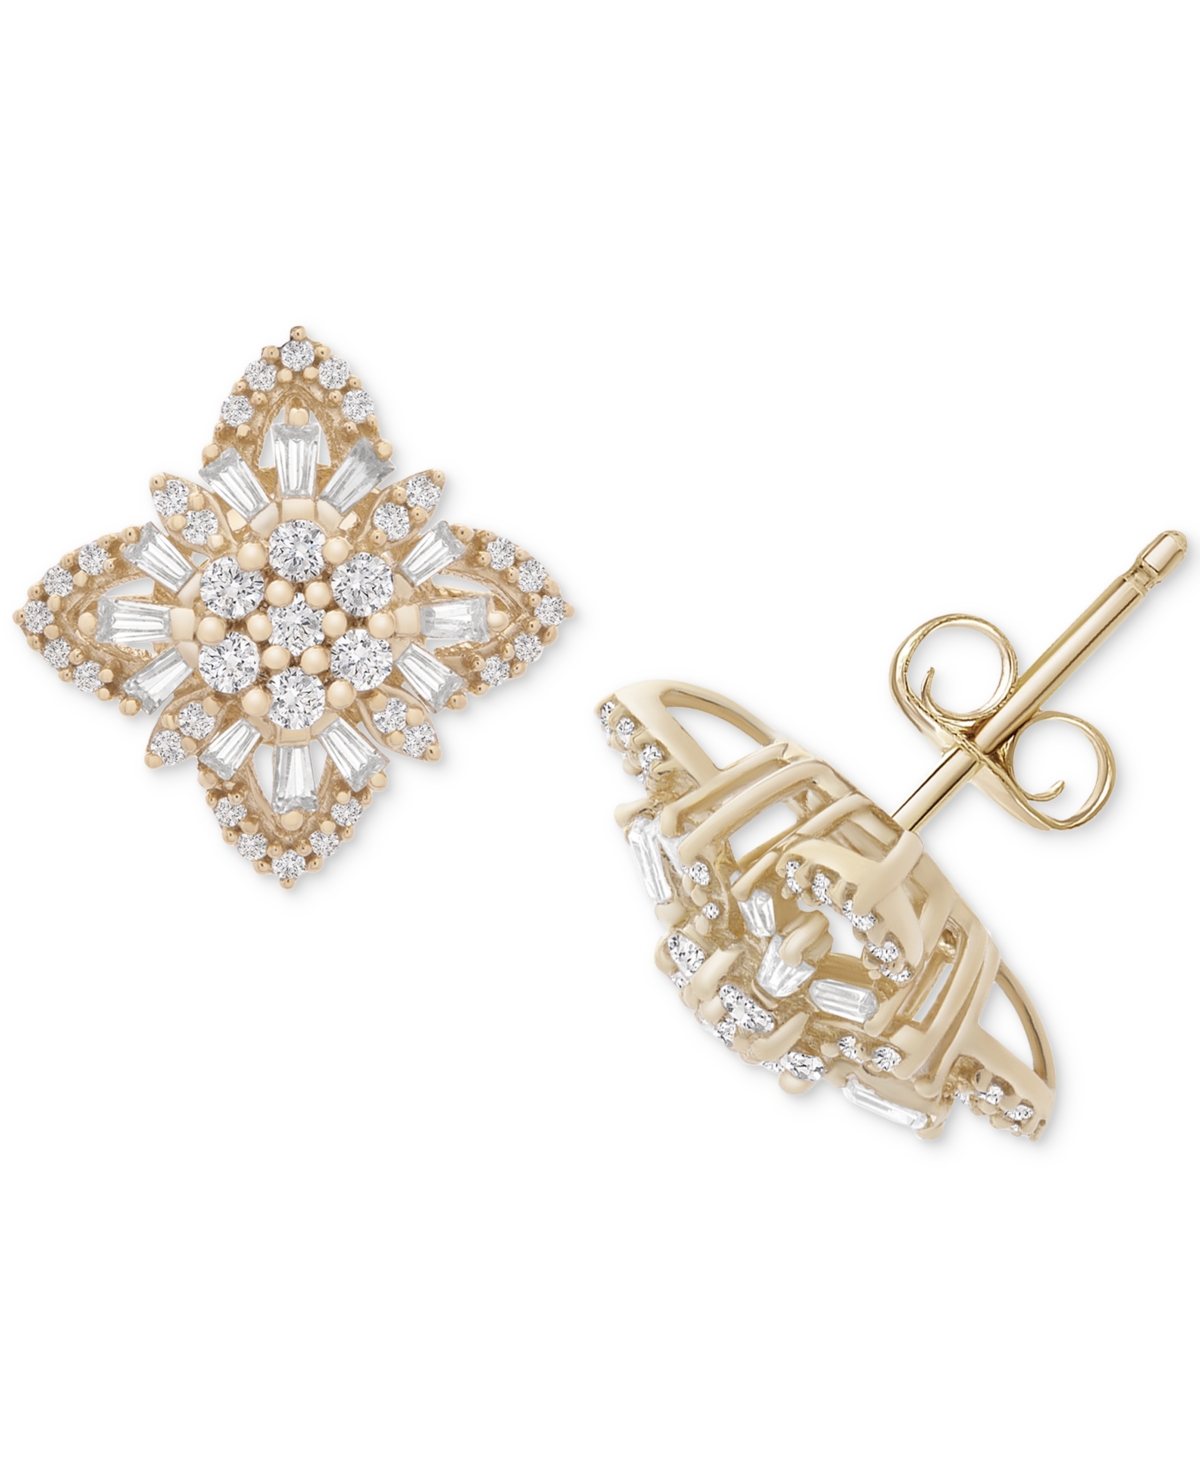 Diamond Round & Baguette Stud Earrings (1/2 ct. t.w.) in 14k Gold, Created for Macy's - K Yellow Gold